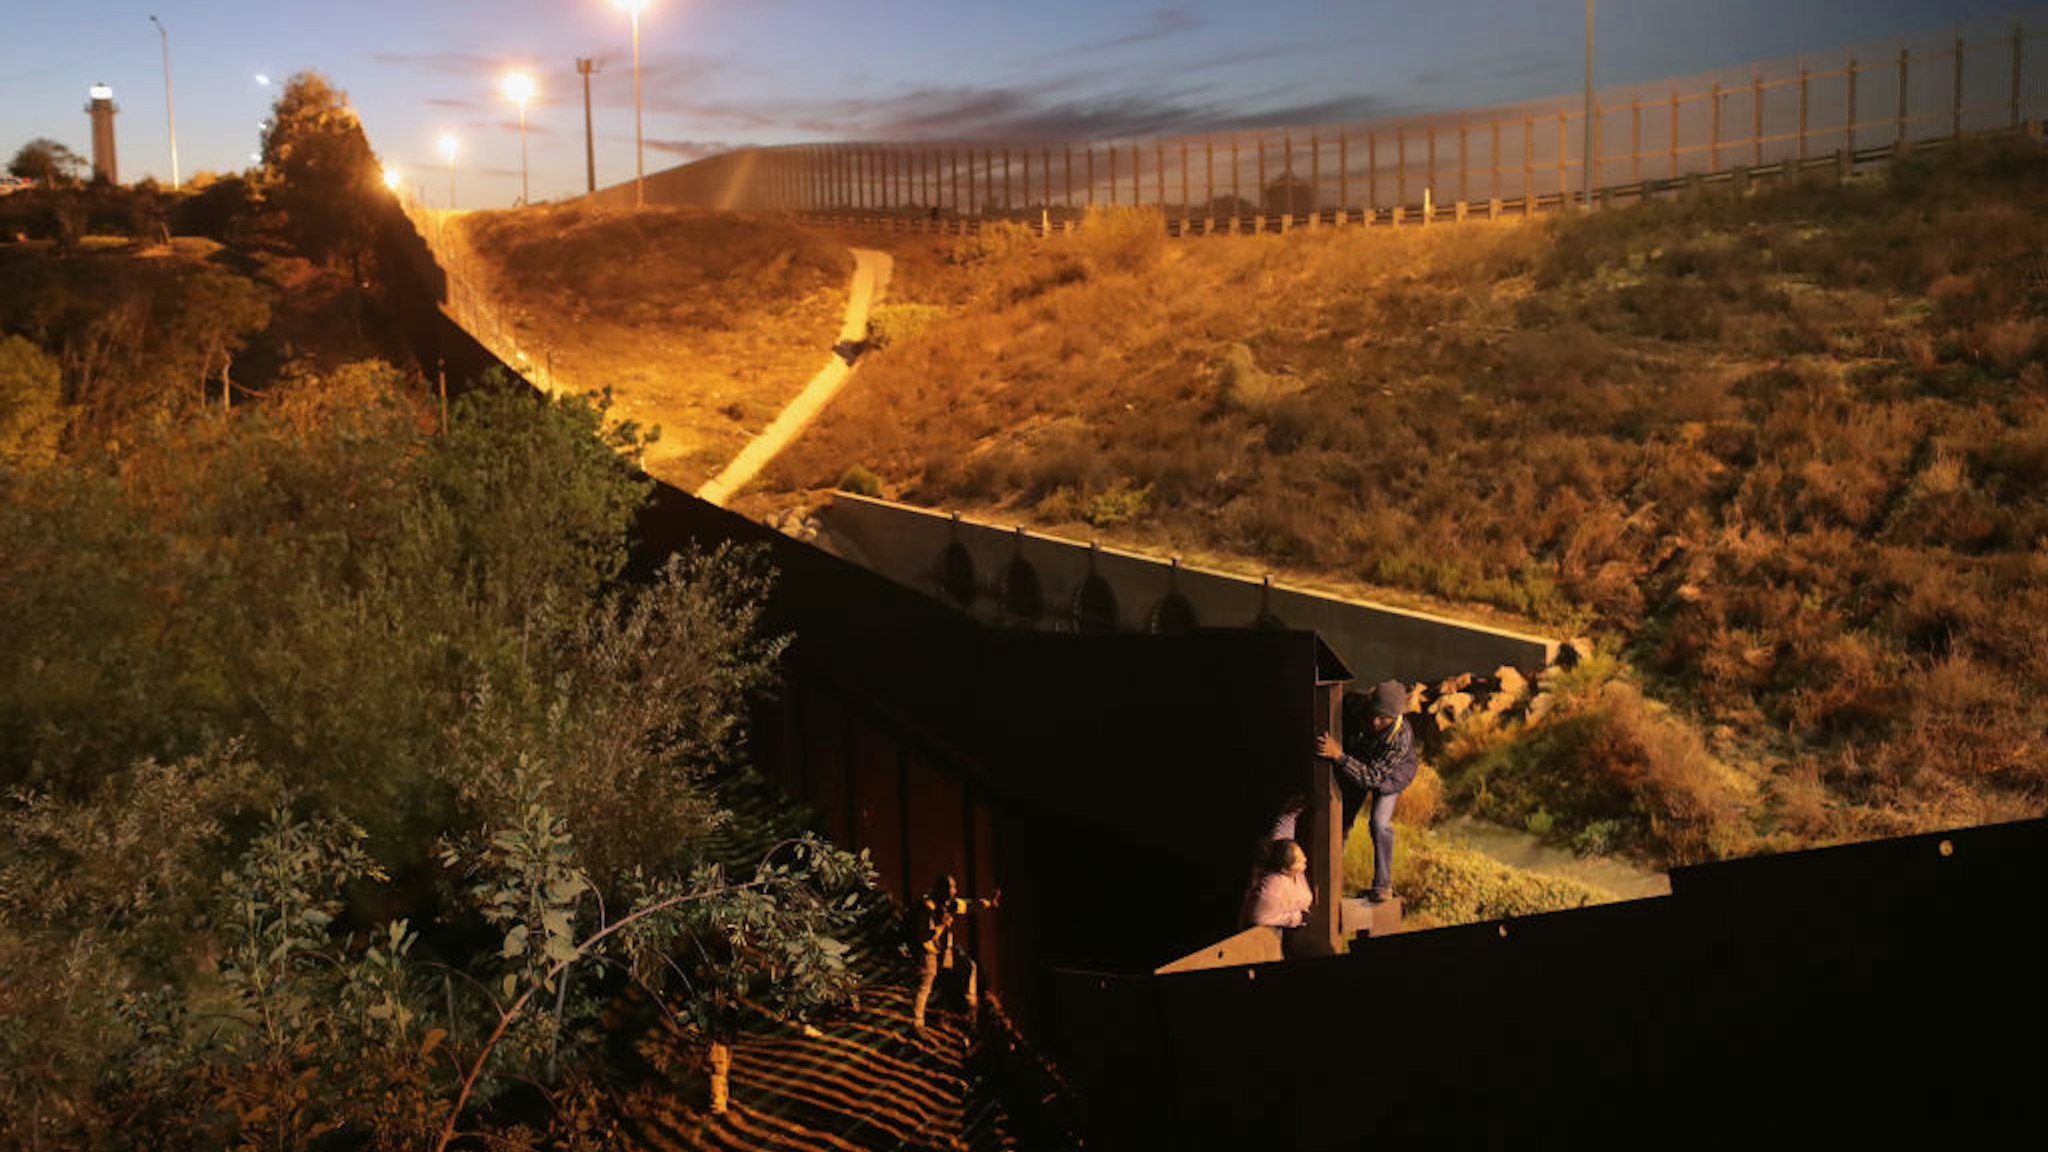 Members of the migrant caravan climb over the U.S.-Mexico border fence on December 3, 2018 from Tijuana, Mexico.